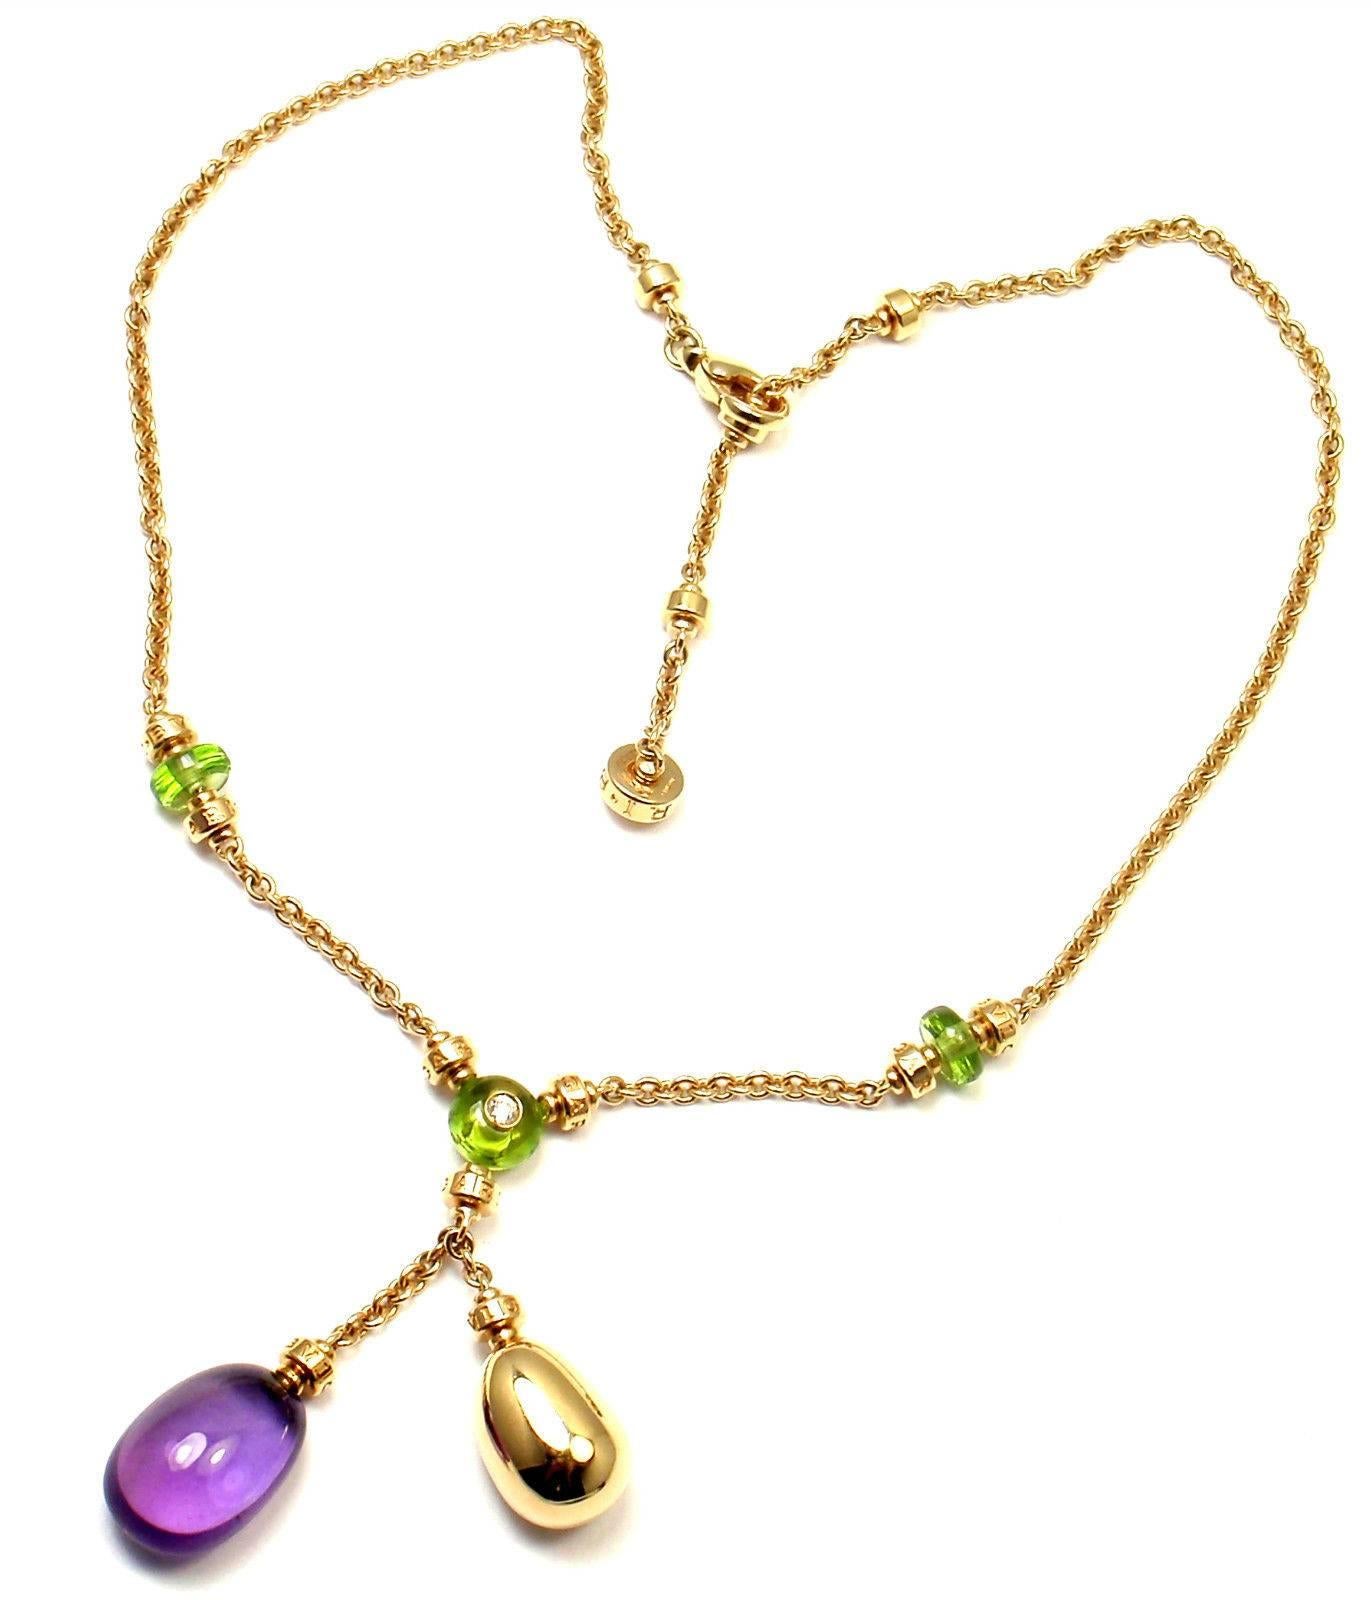 18k Yellow Gold Sassi Mediterranean Diamond Peridot Amethyst Necklace by Bulgari.  
With 3 peridots 1 large amethyst
1 round brilliant cut diamond VS1 clarity, G color total weight approx. .05ct
Retail Price: $13,000 plus tax.
Details:  
Length: